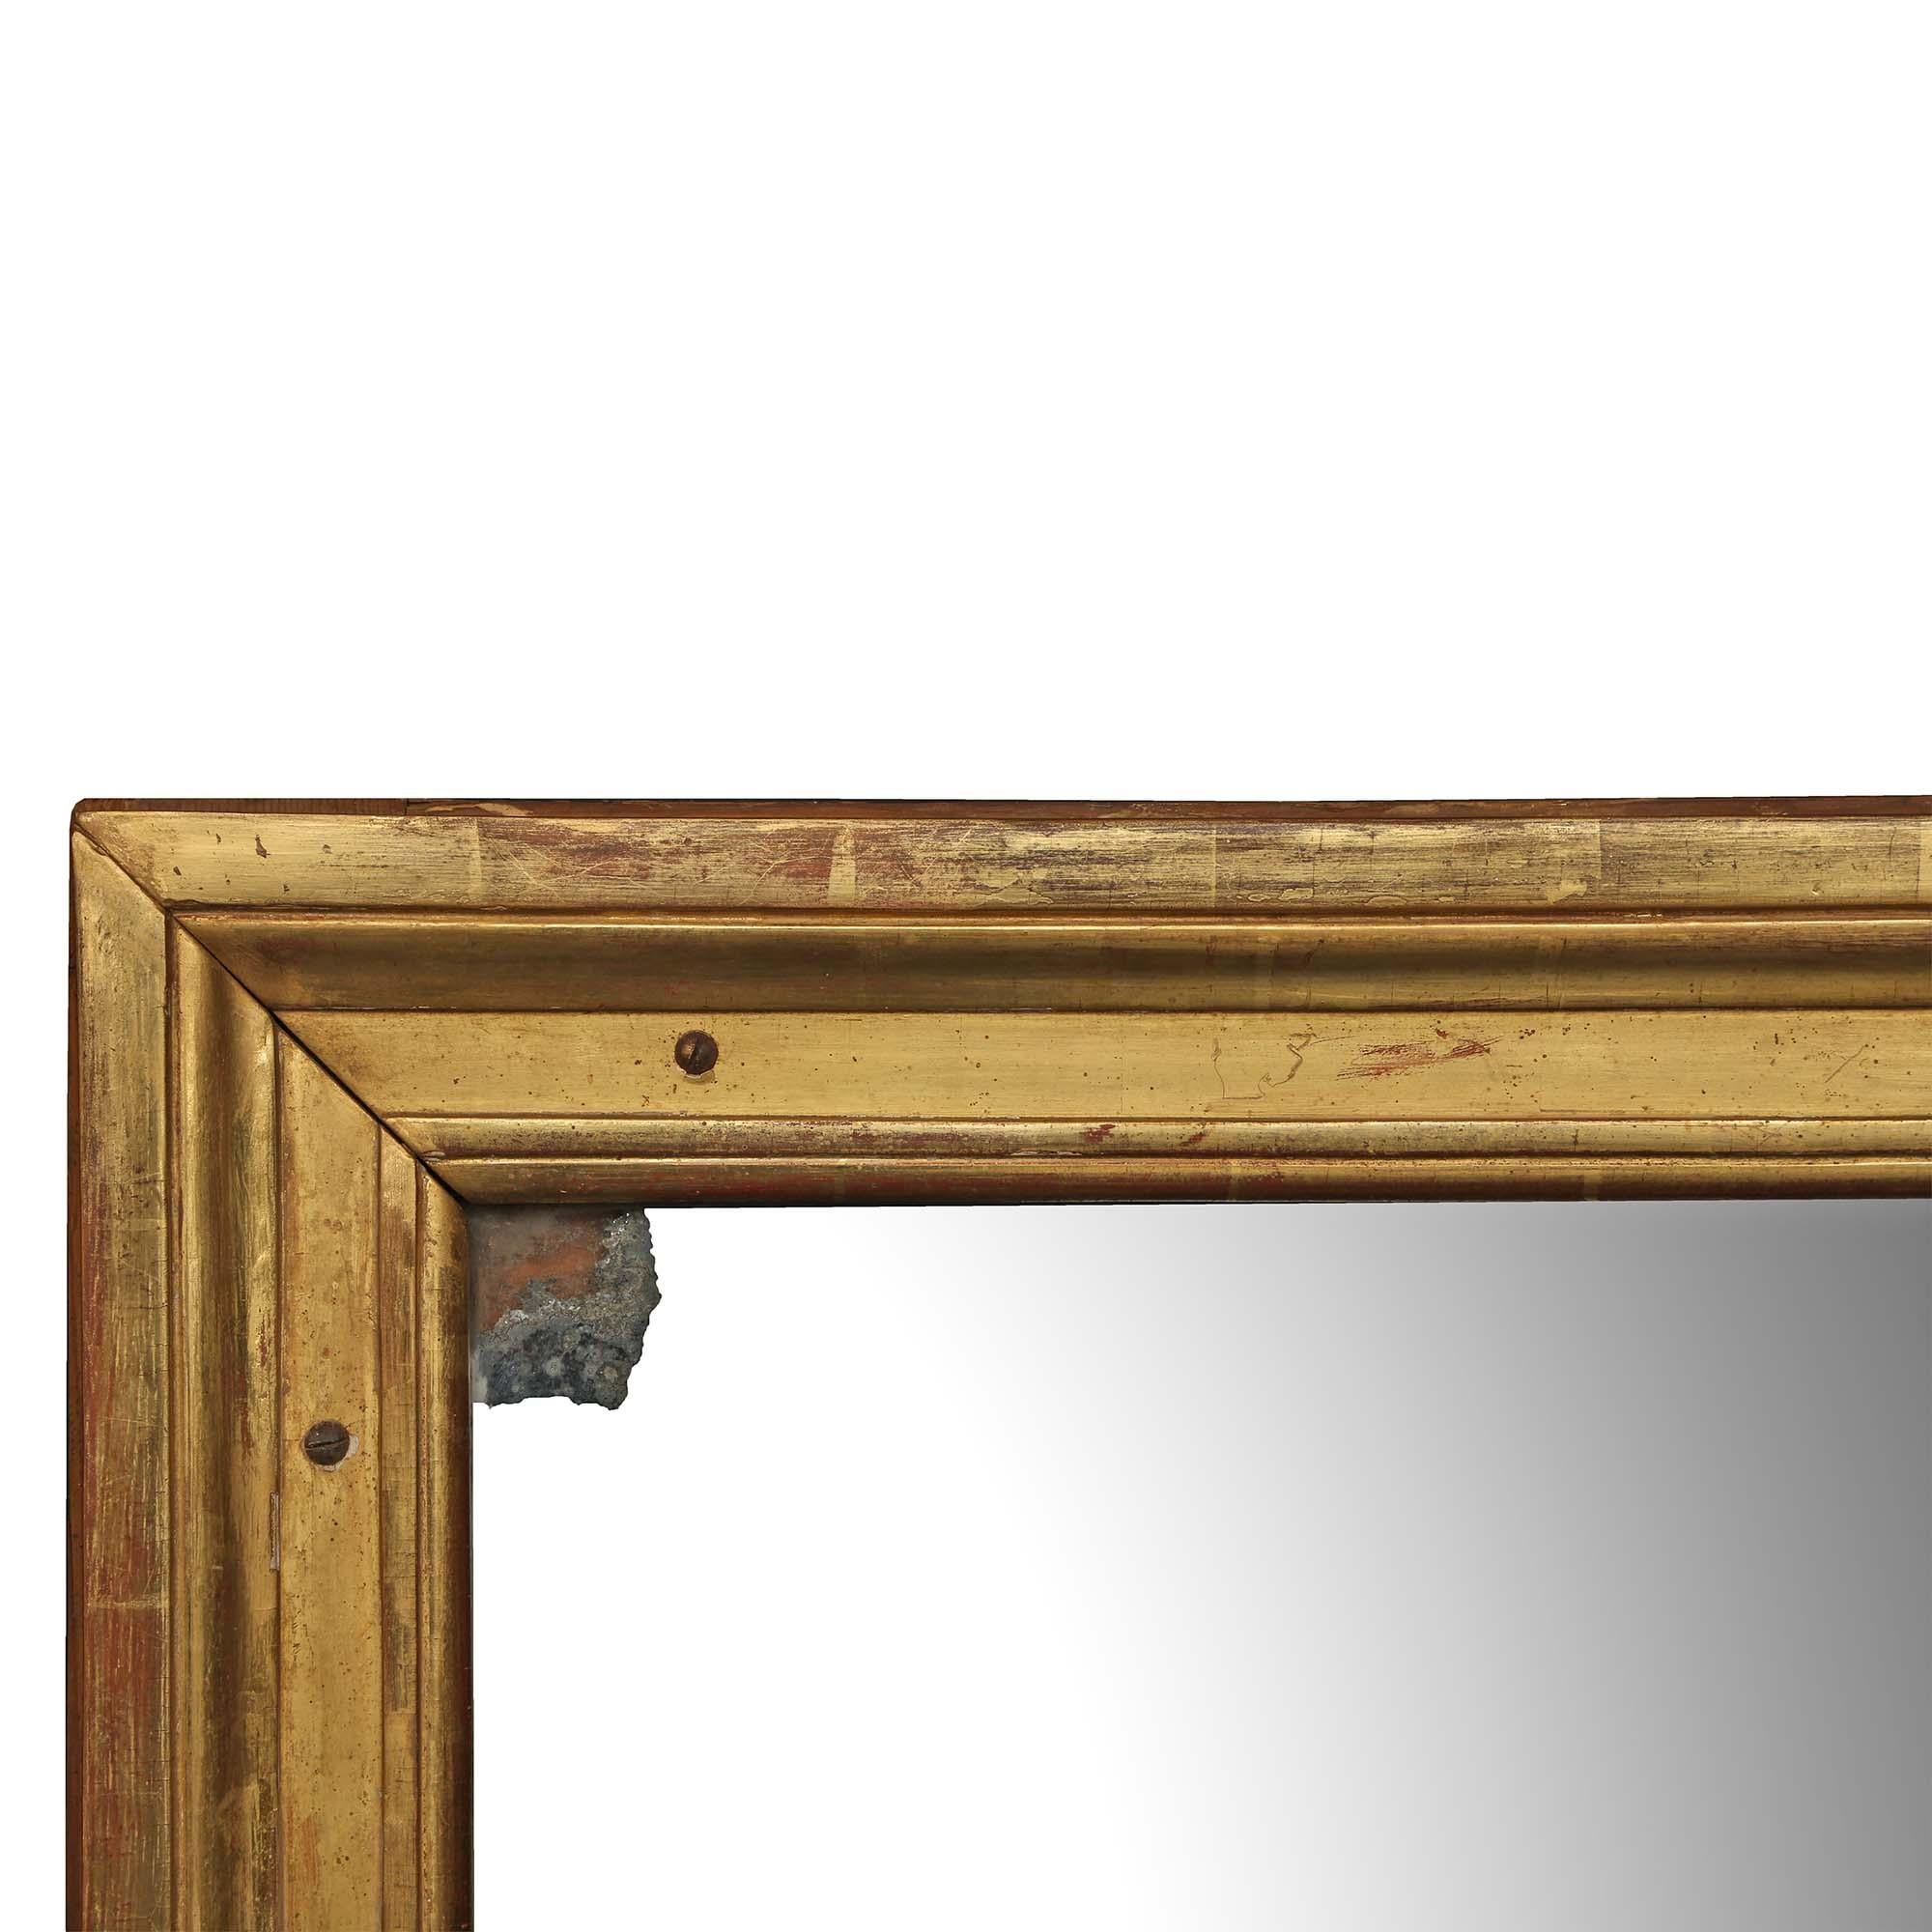 French 18th Century Louis XVI Period Giltwood Mirror In Good Condition For Sale In West Palm Beach, FL